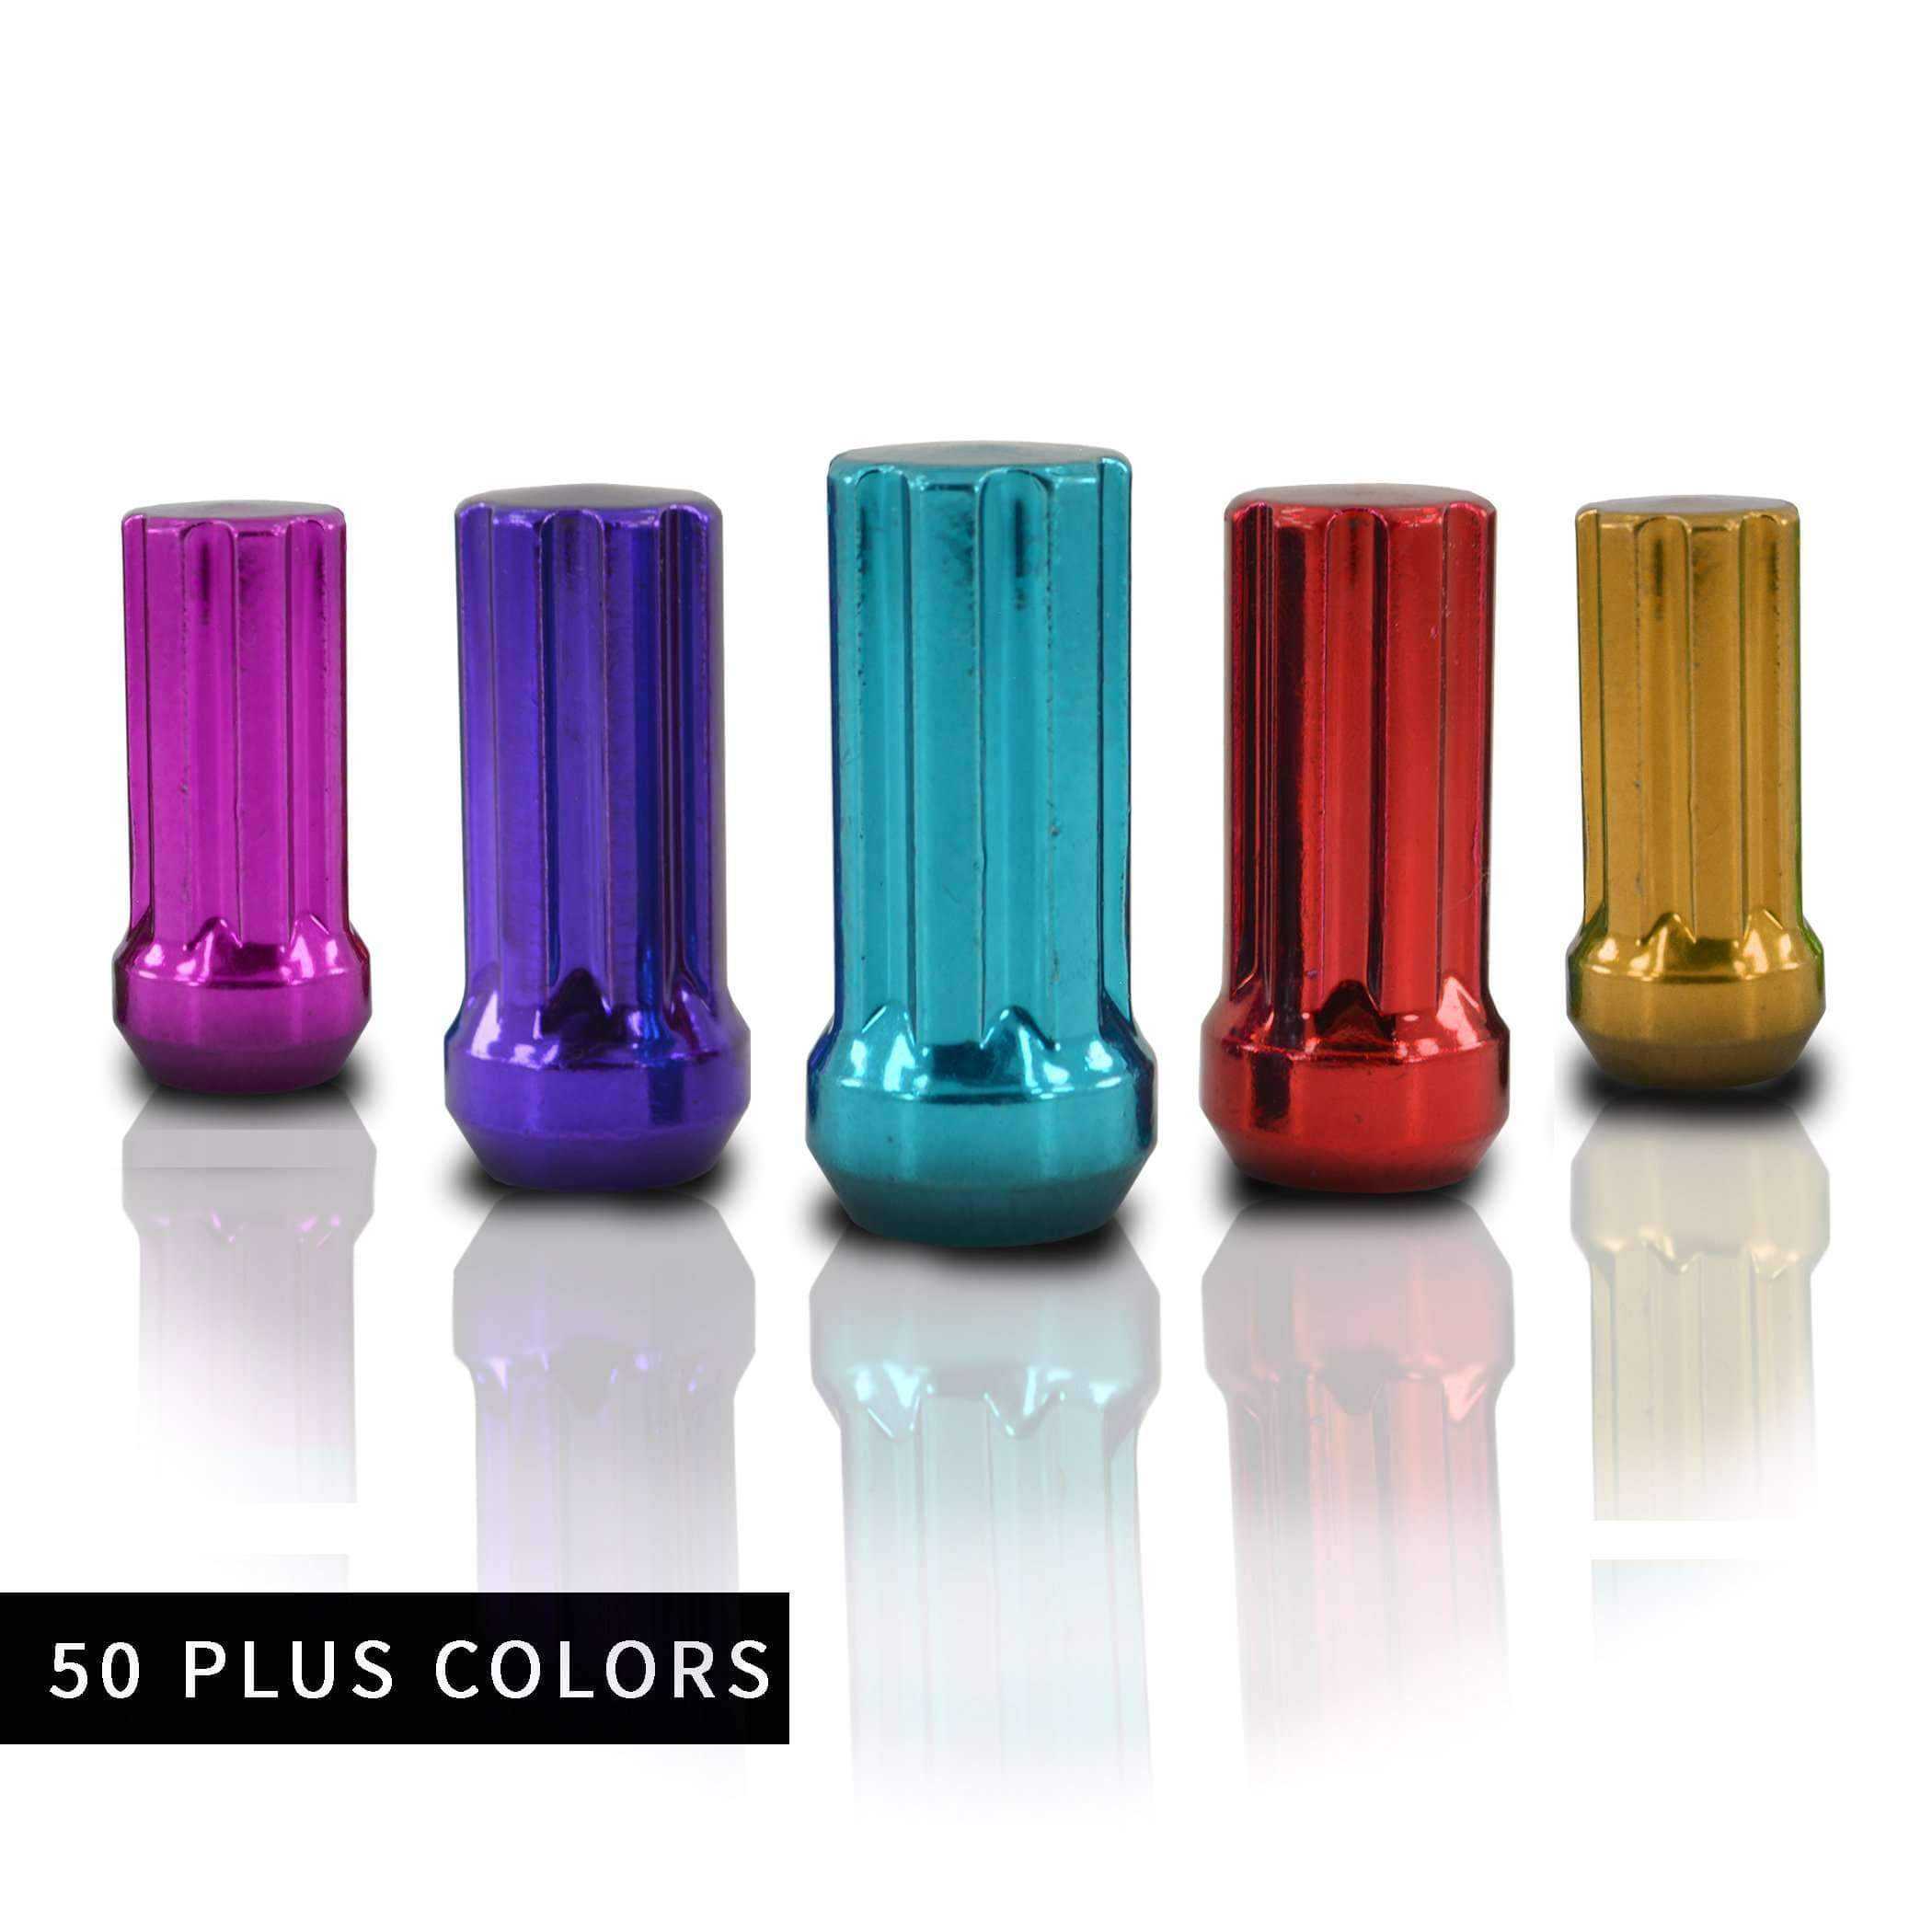 24 pc 14x2 main picture 7 Spline Duplex security lug nuts 2" Tall For Aftermarket Wheels powder coated durable coating